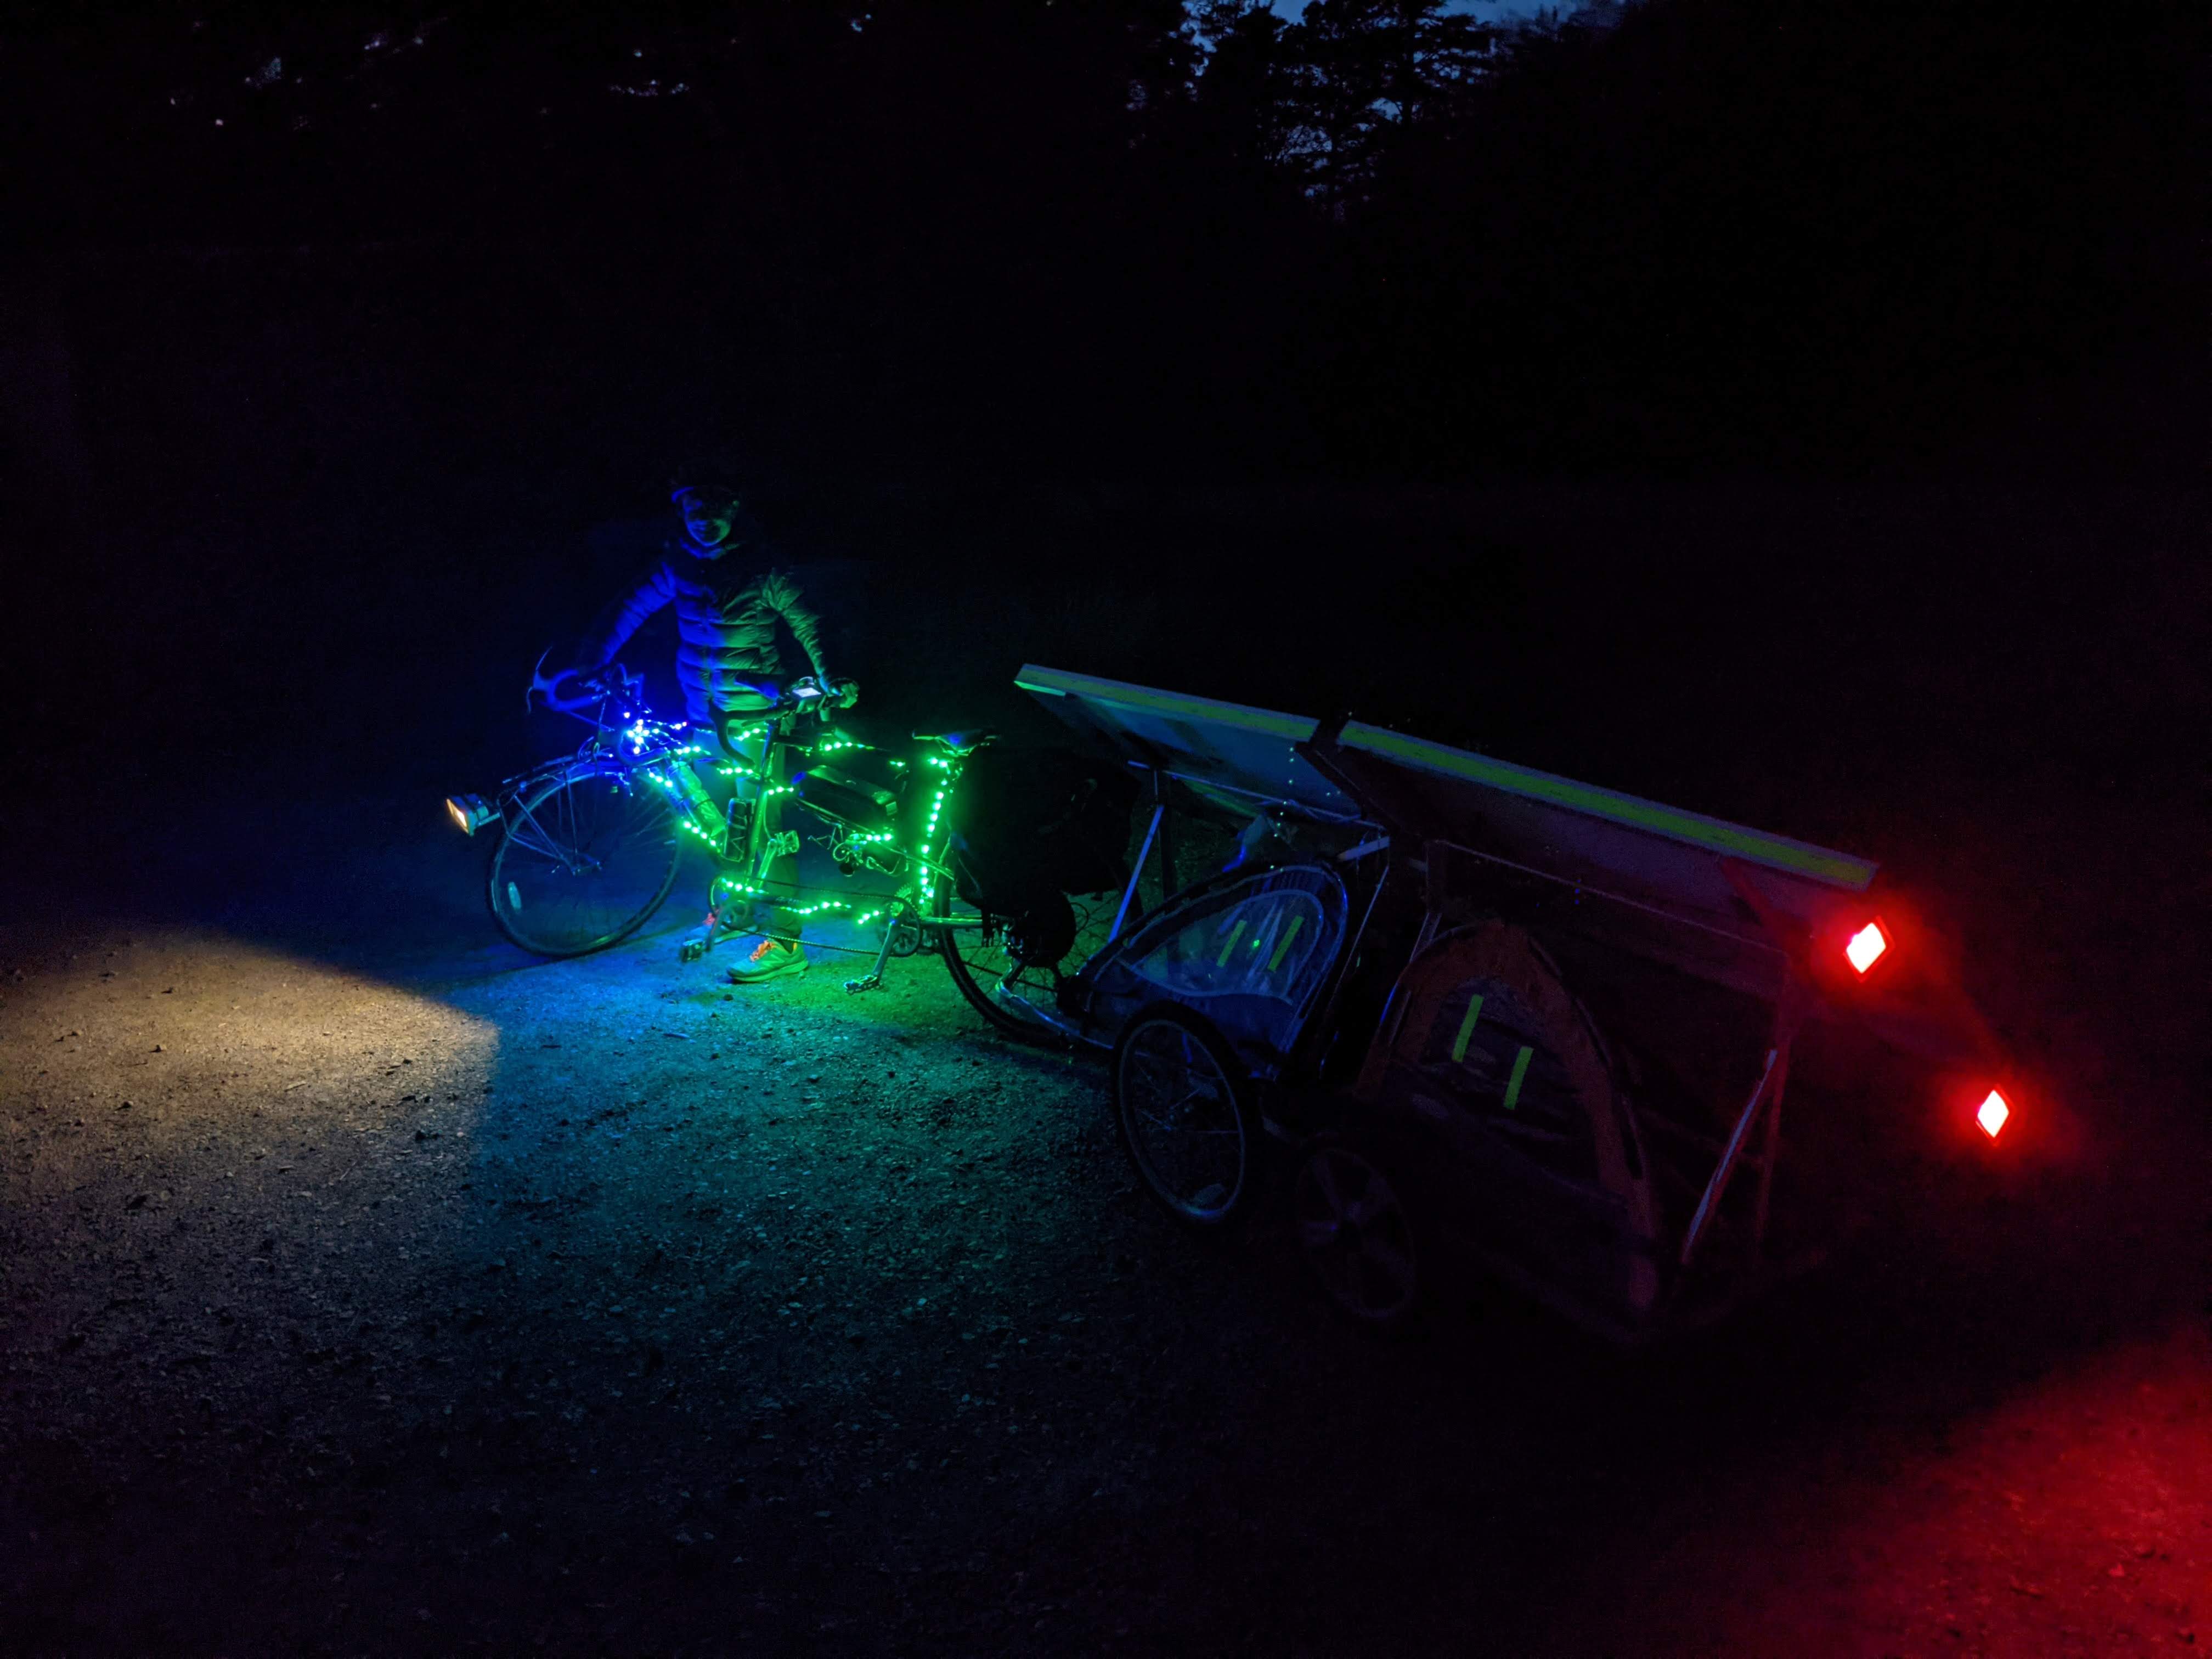 ebike trailer lit up with blue/green lights and tail light